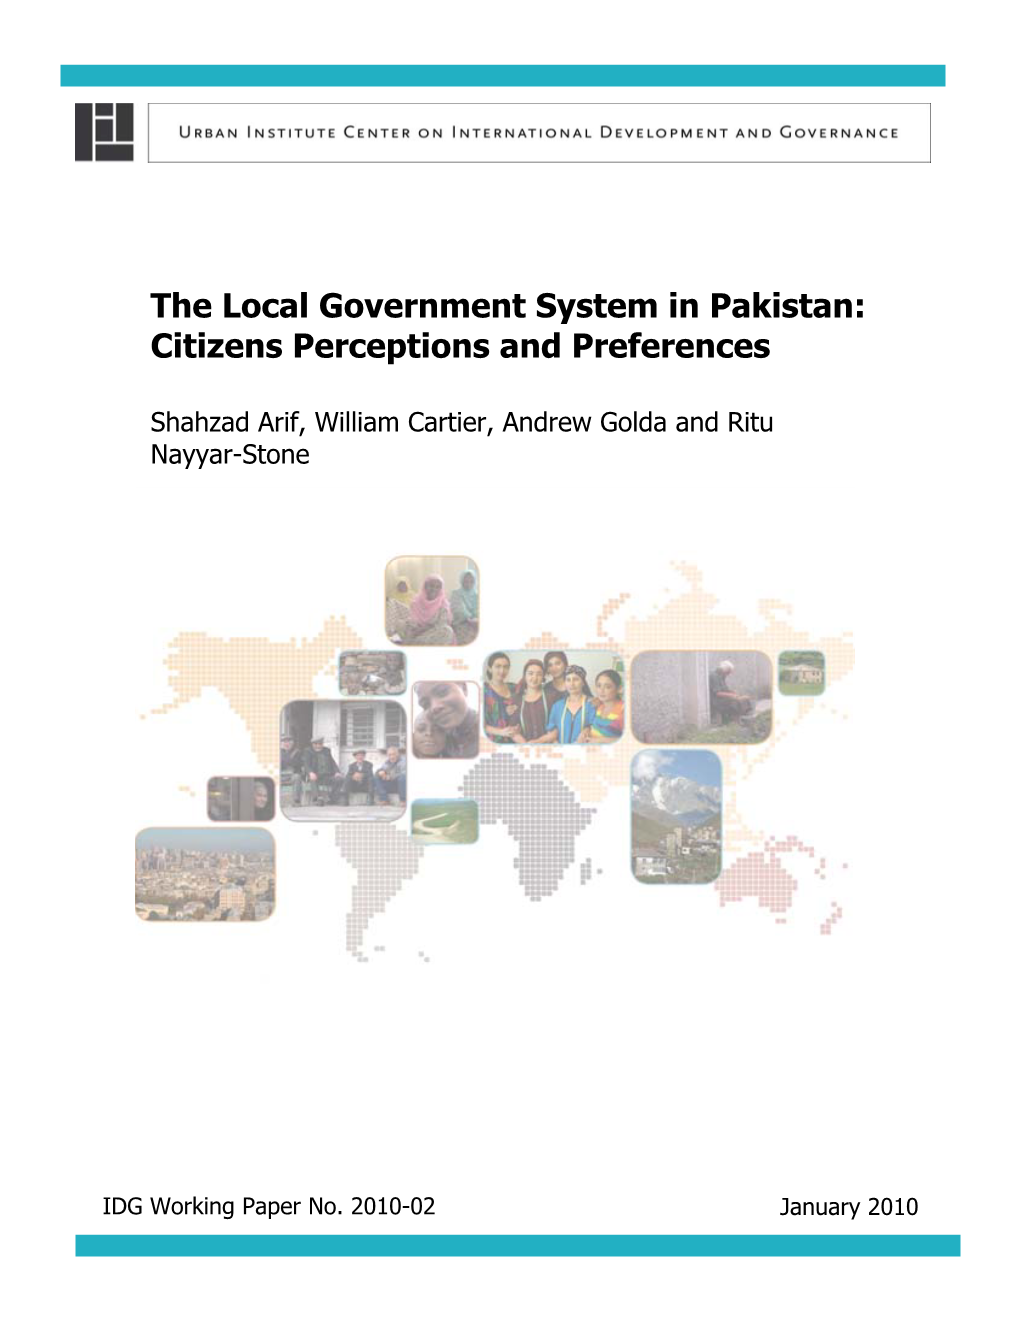 The Local Government System in Pakistan: Citizens Perceptions and Preferences